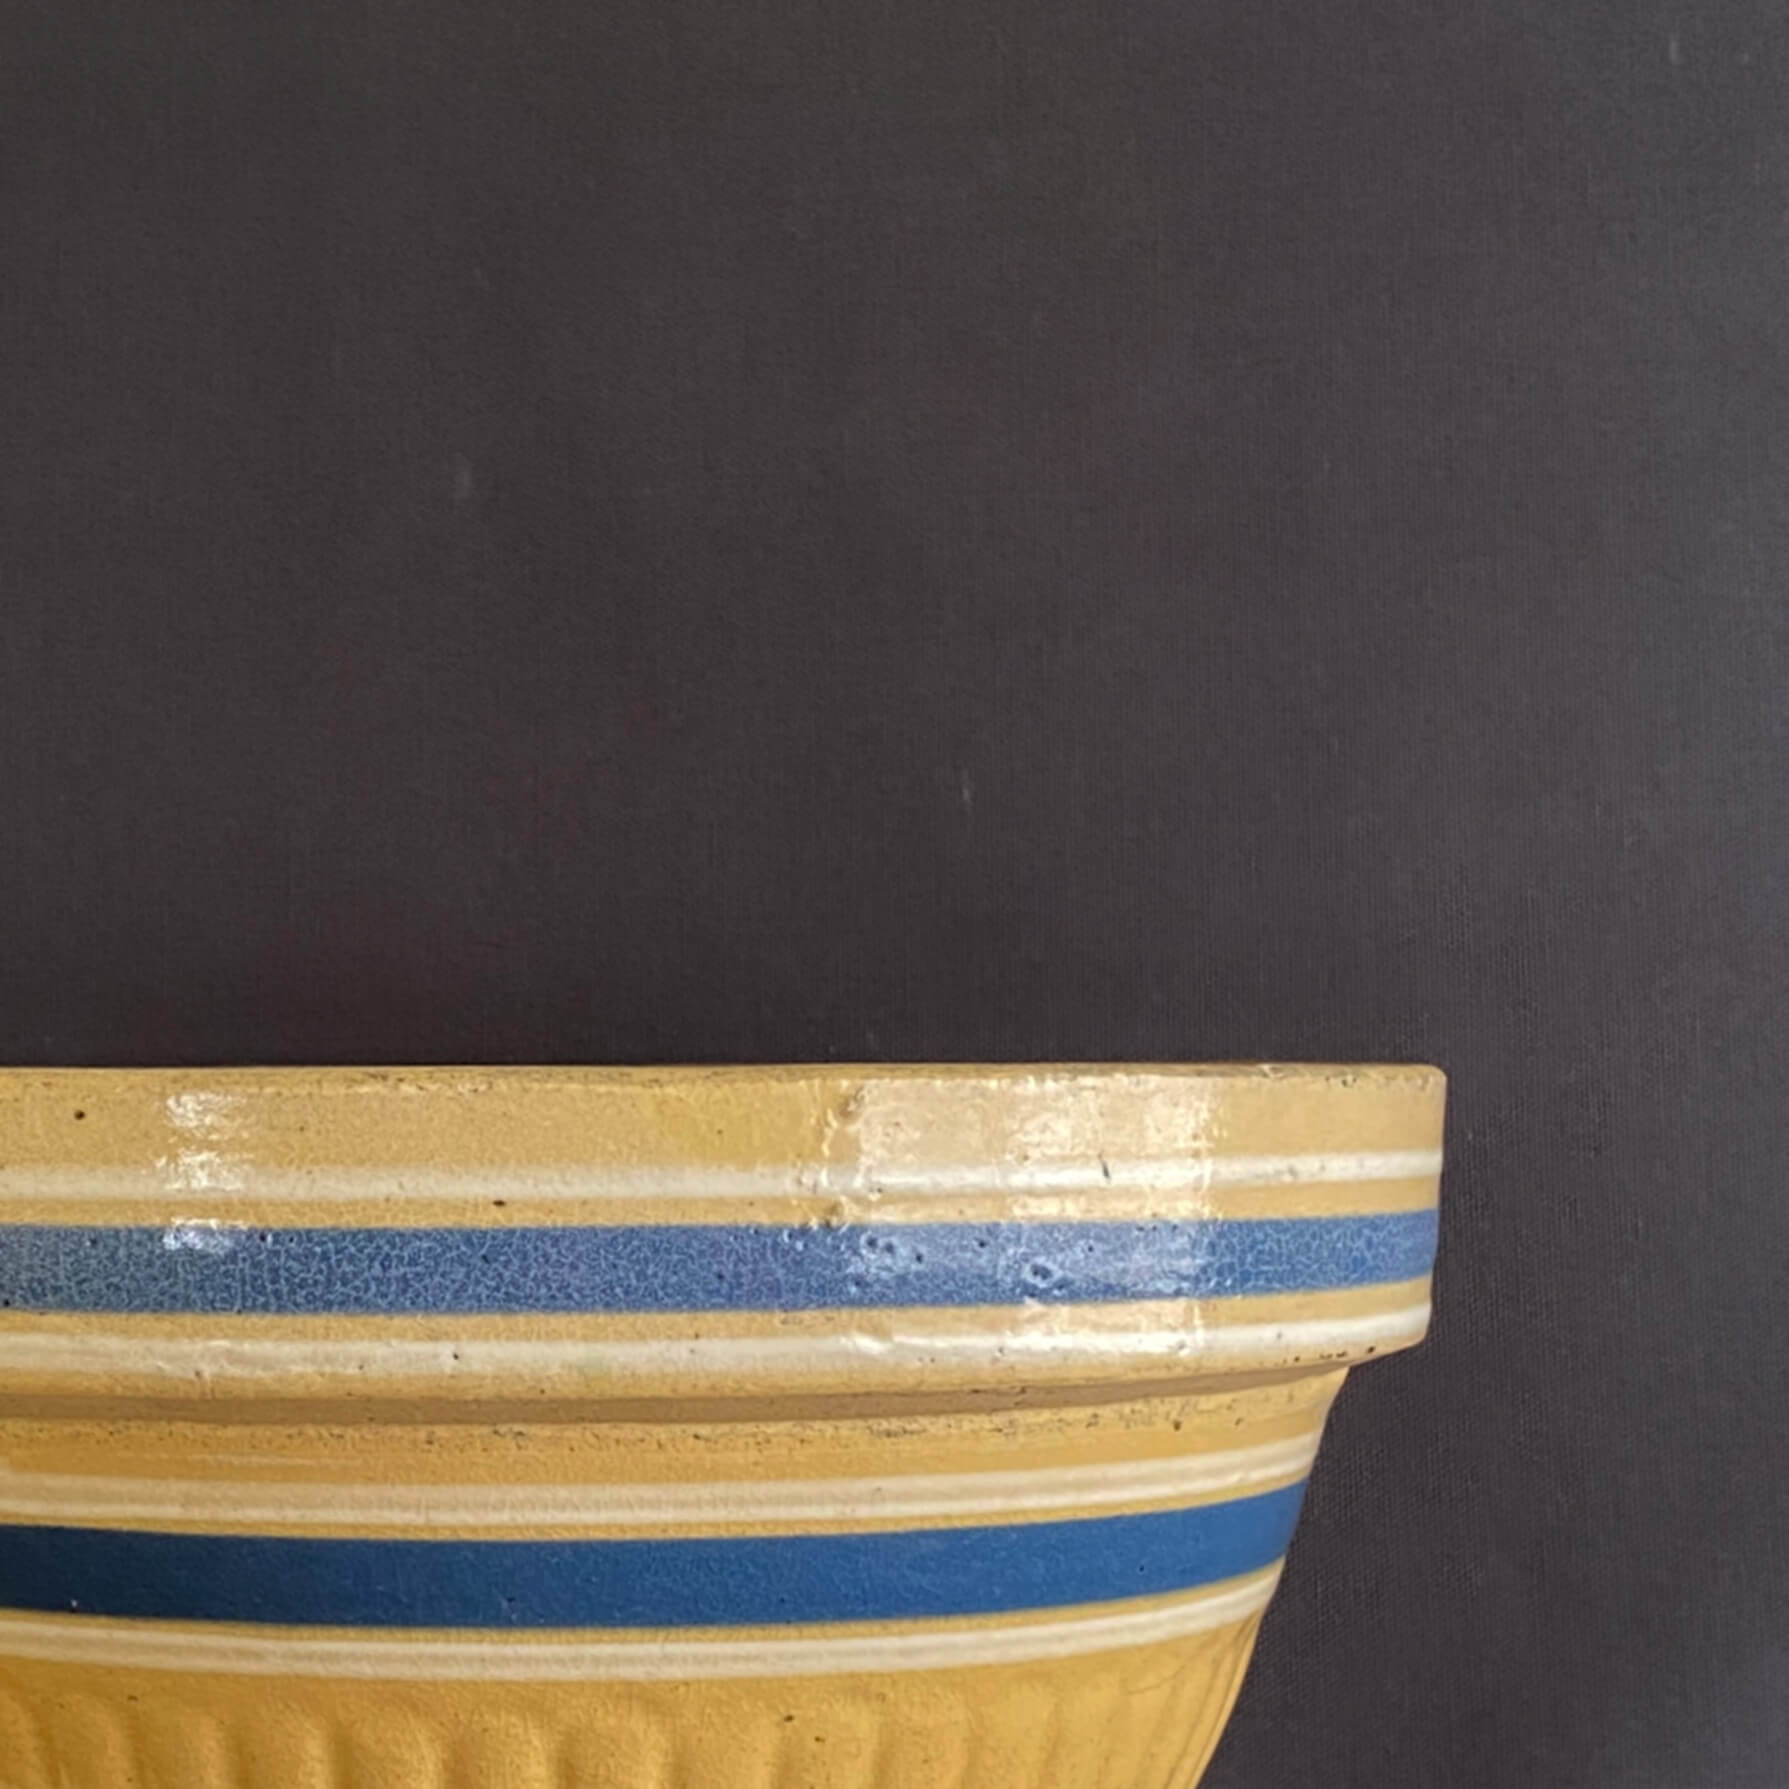 Antique 1920s Yellow Stoneware Mixing Bowl with Blue and White Stripes